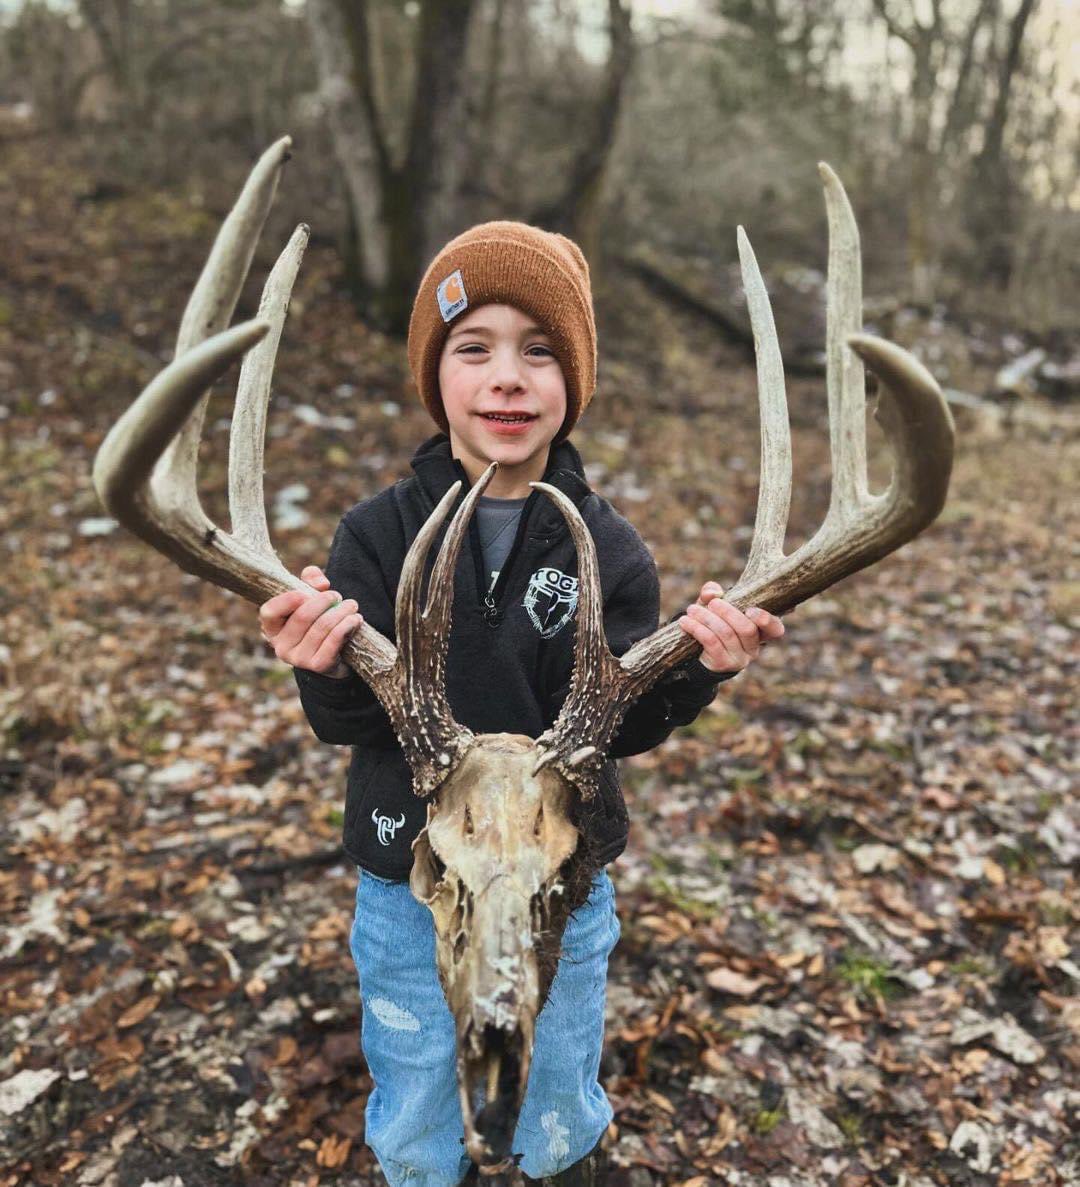 Starting shed season off with a BANG.  Congrats on a great find Griffin!

#hunting #deerhunting #deer
#SaturdayVibes #SaturdayMorning #SaturdayMood #Caturday #BananaRepublic #Ozempic #Snowing #SaturdayMotivation #PalmBeach #Fraud #Colbert #SchoolboyQ #Rise #GoodSaturday